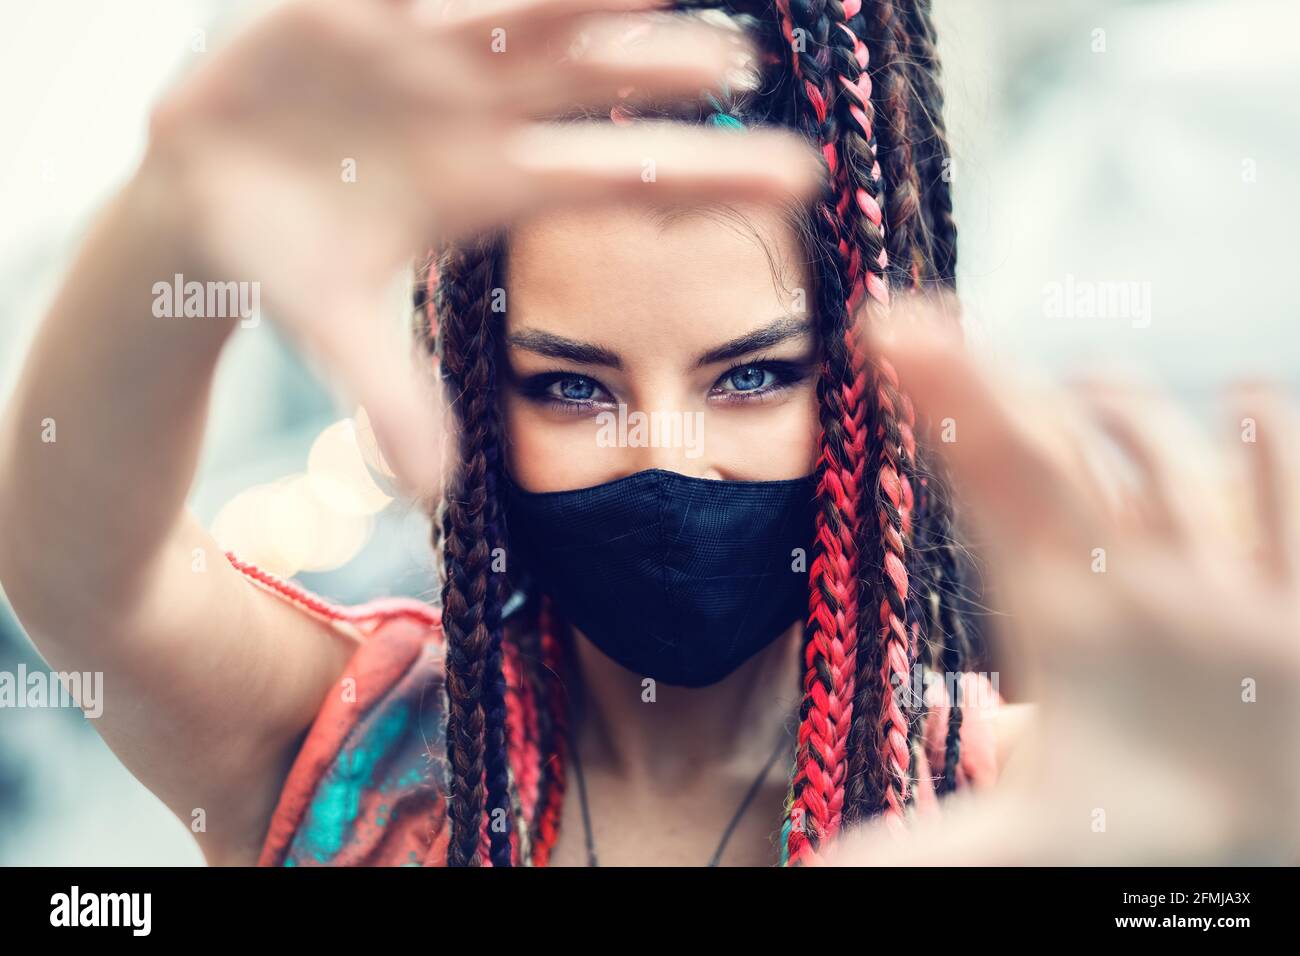 Playful cool rebel funky hipster young girl with face mask and crazy hair taking selfie on street Stock Photo